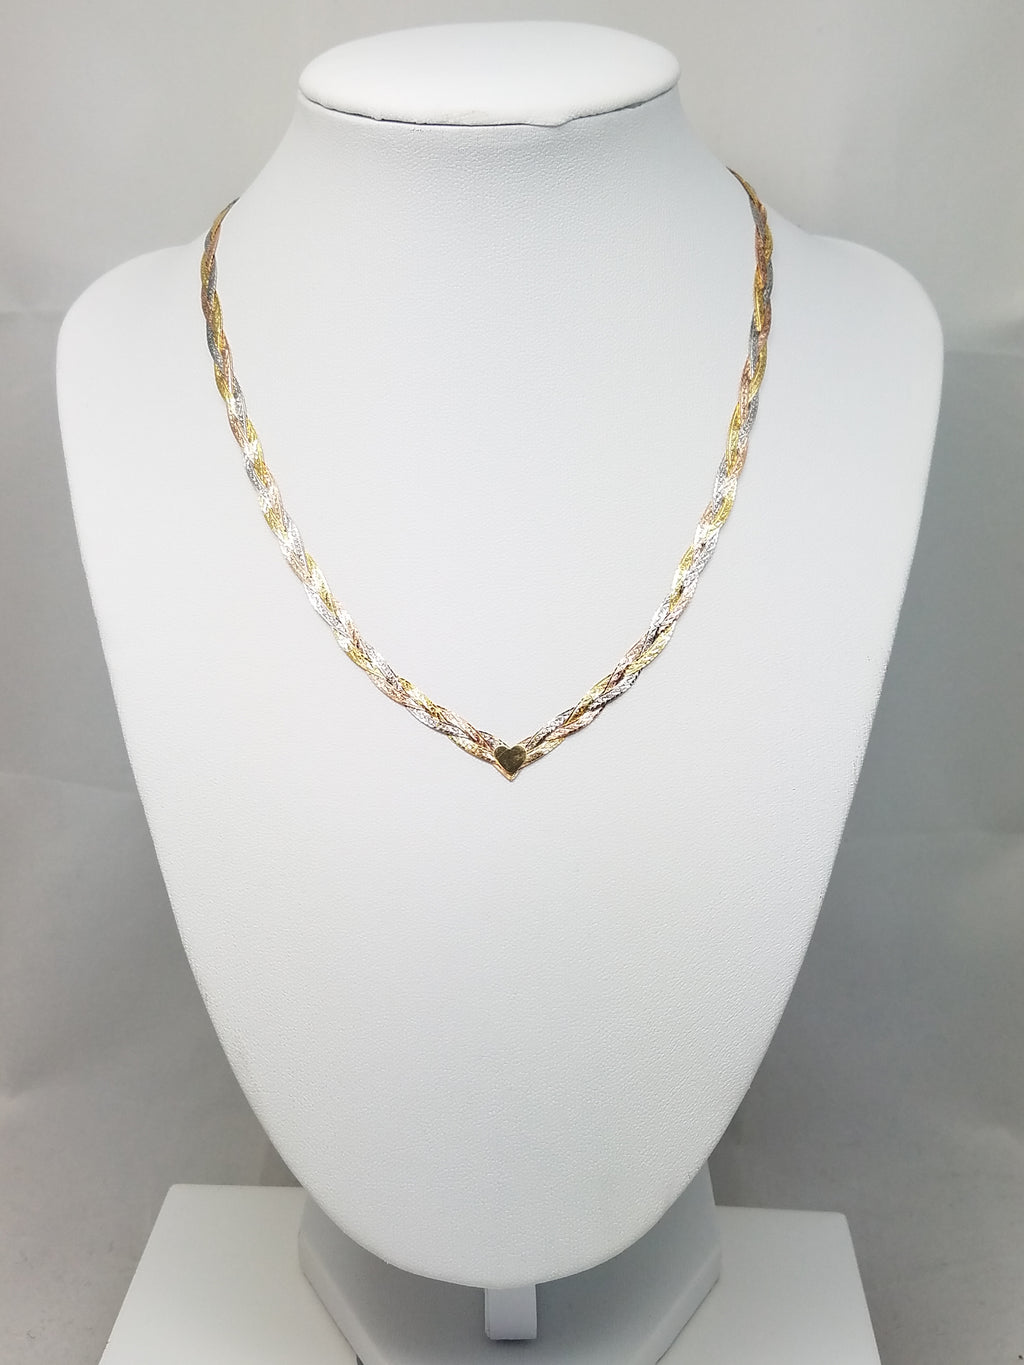 16" 14k Solid Tri-Color Gold Braided Chevron Necklace Italy